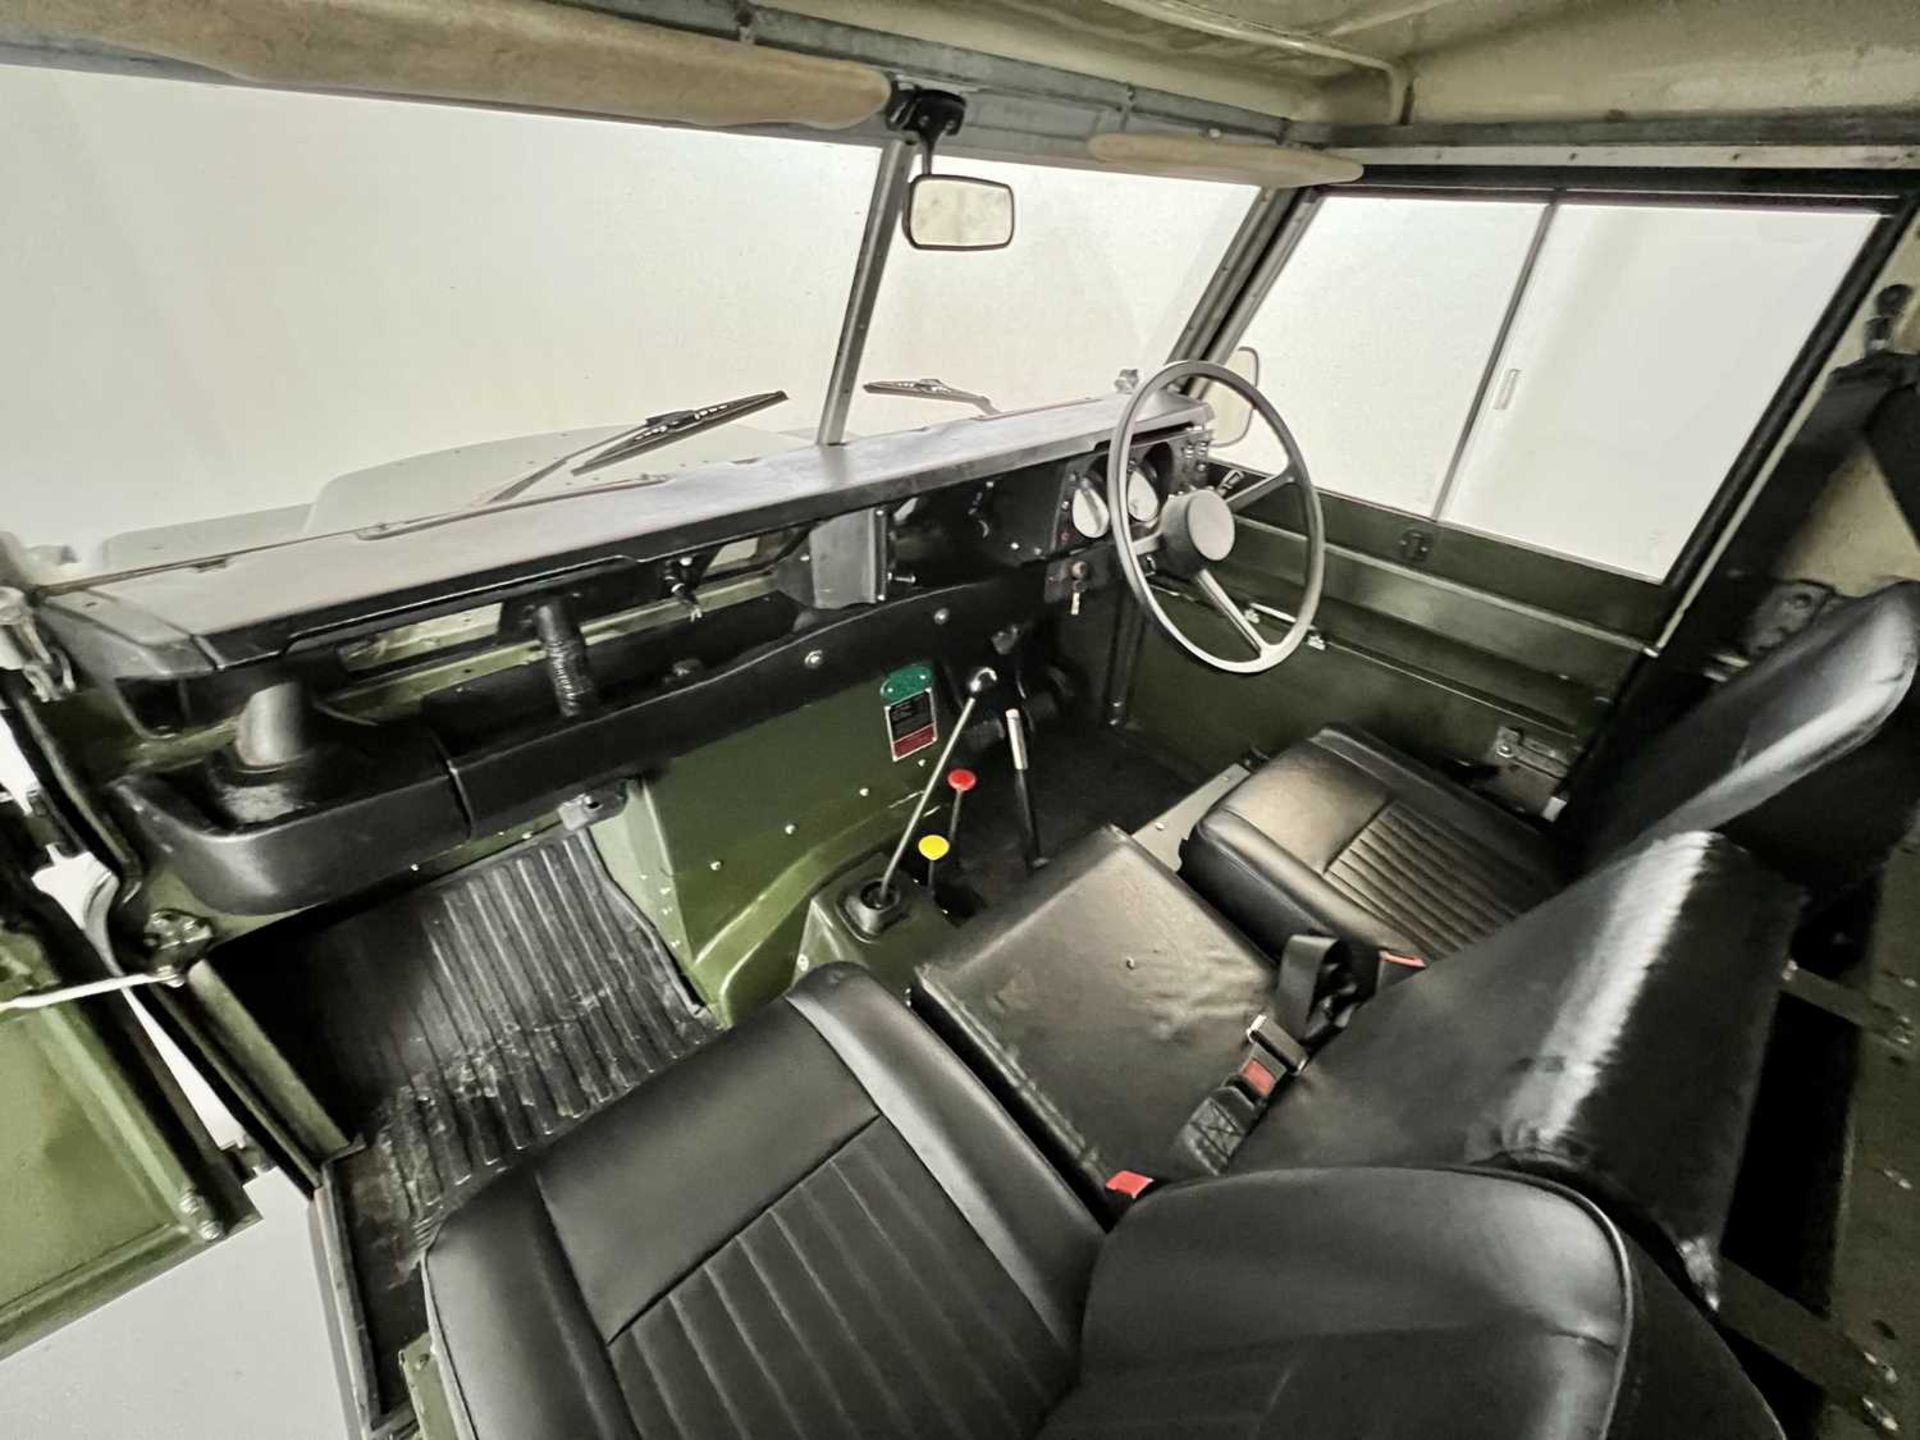 1981 Land Rover Series 3 - 6 Cylinder - Image 23 of 31